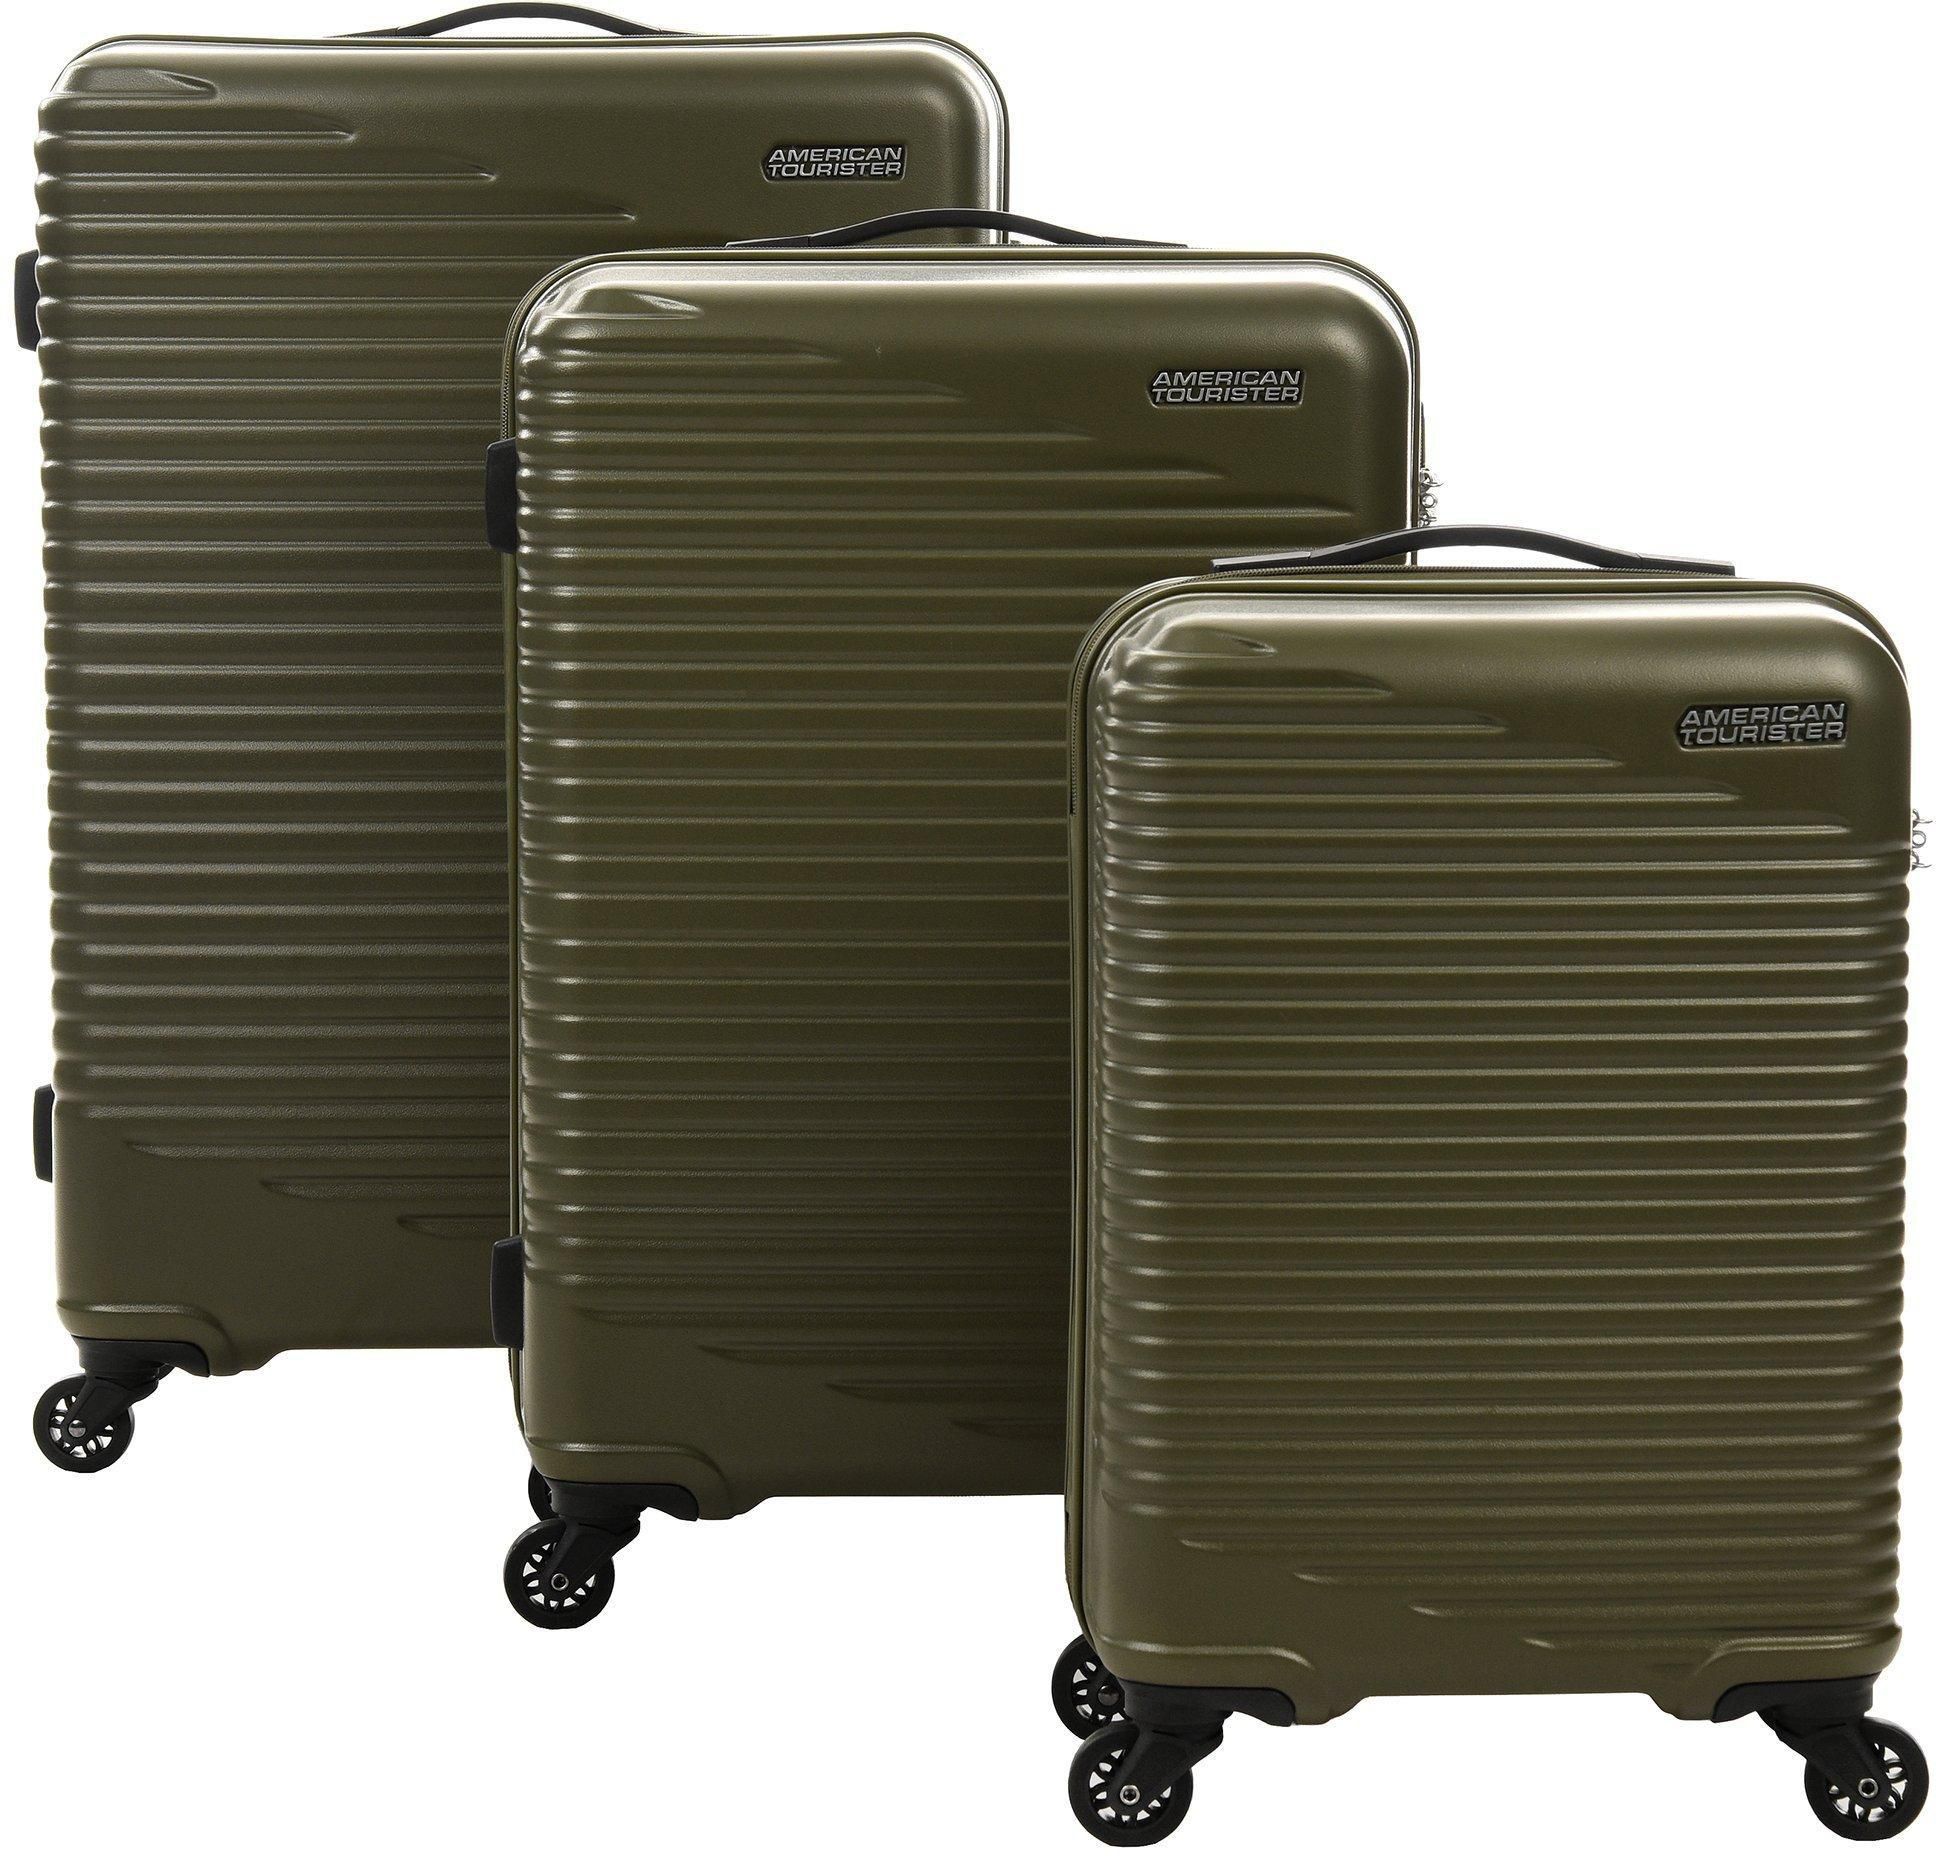 American Tourister Skypark Set of 3Pc HS ABS Hard Luggage, 20/25/29 Inch, Green